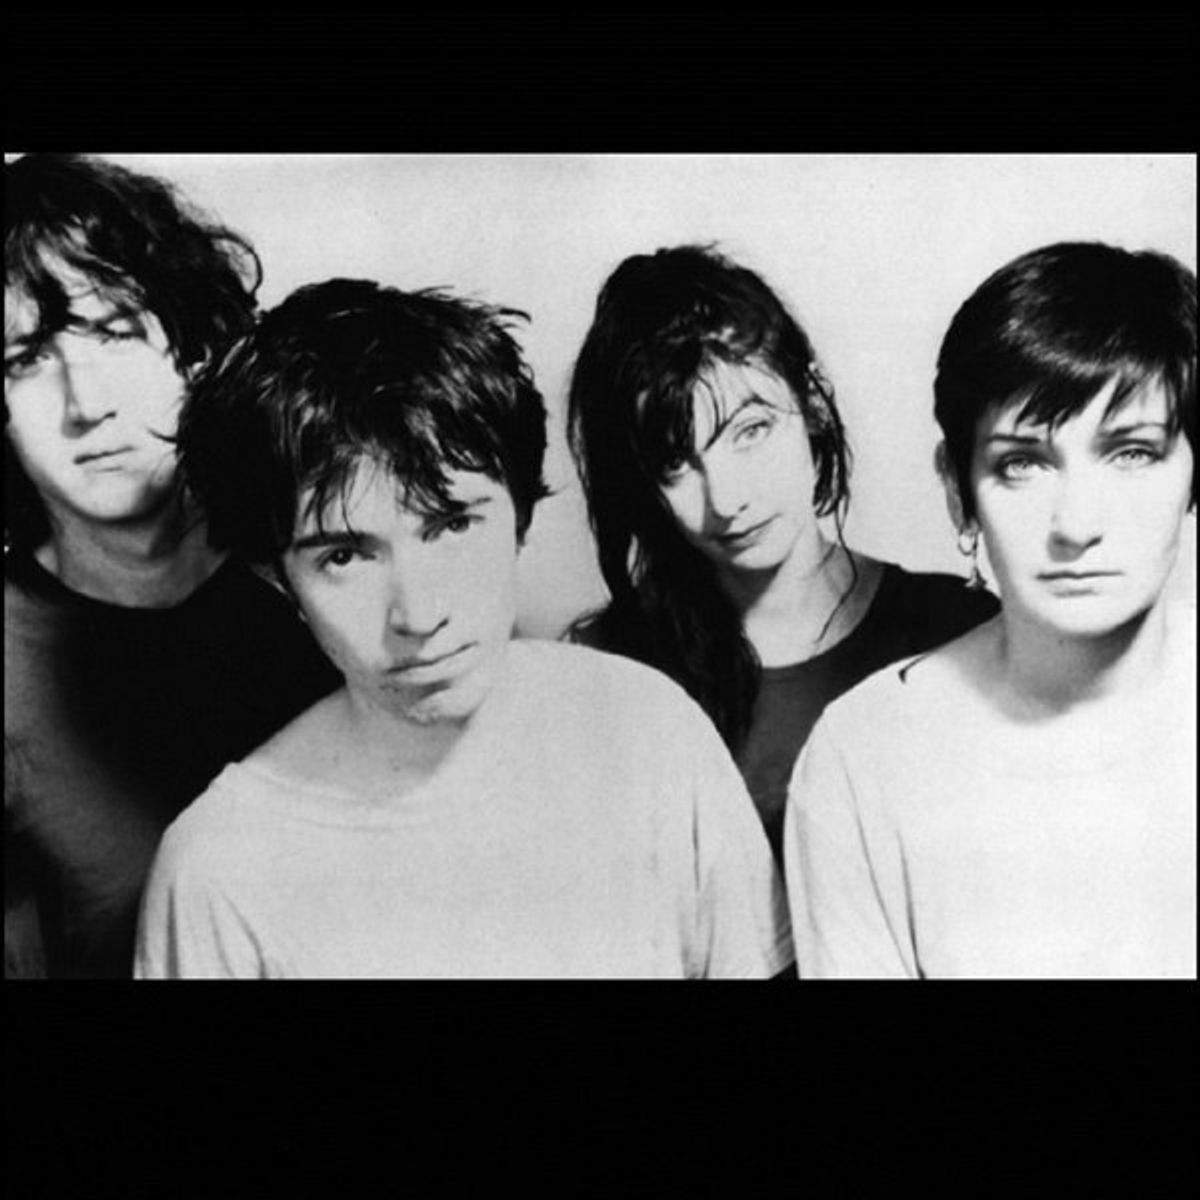 My Bloody Valentine's 'Loveless': An Exploration of Gorgeous Discord